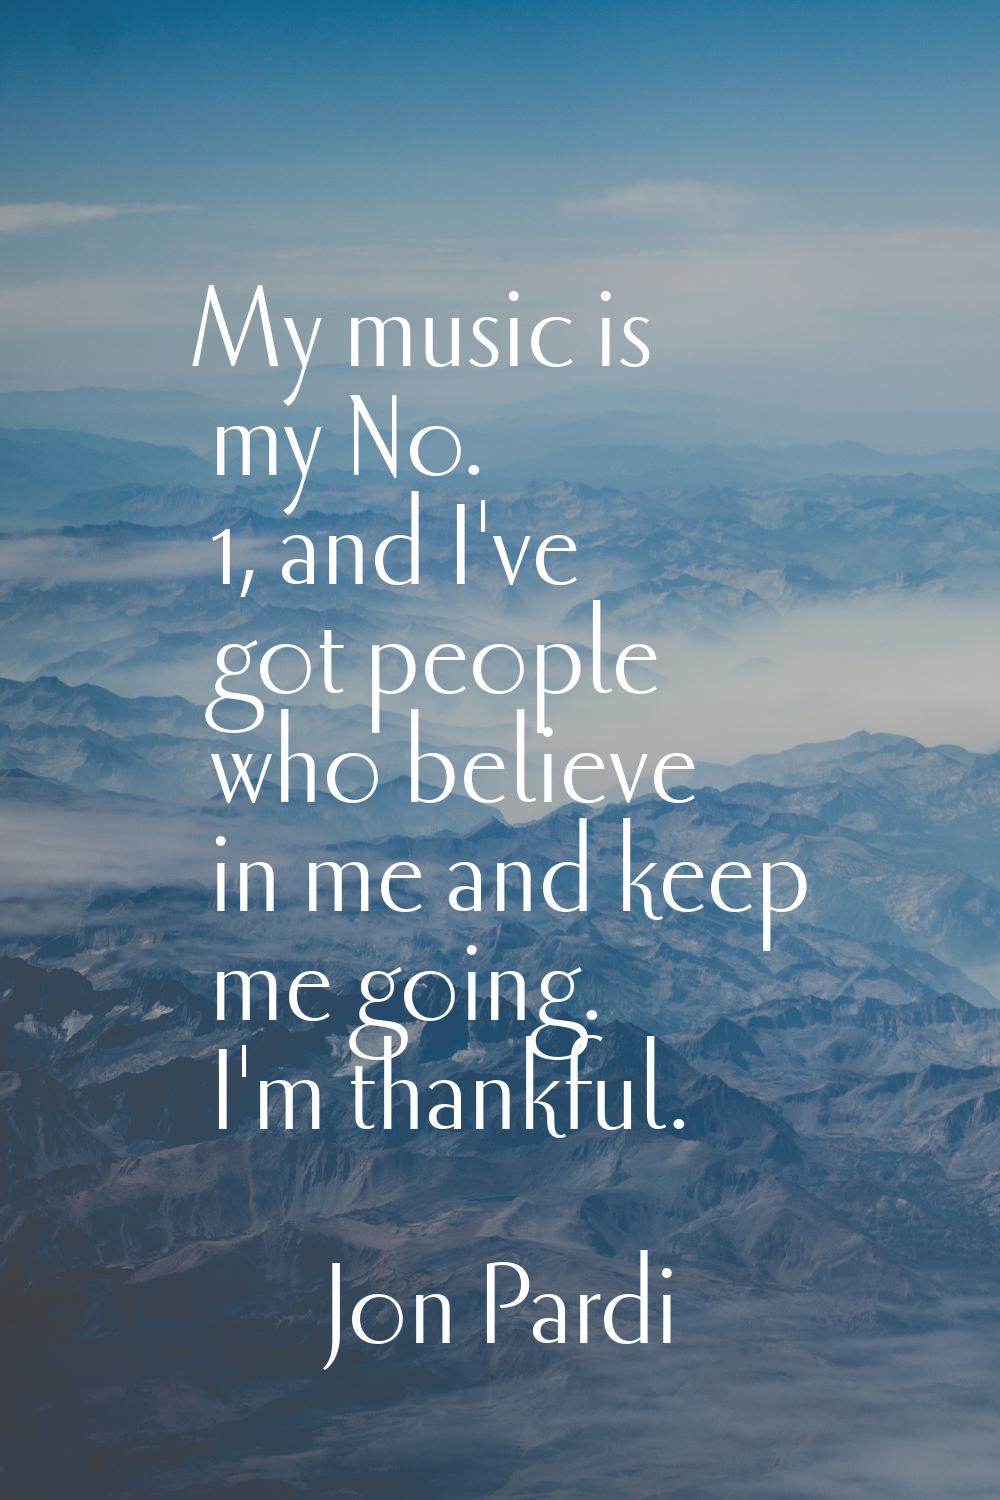 My music is my No. 1, and I've got people who believe in me and keep me going. I'm thankful.